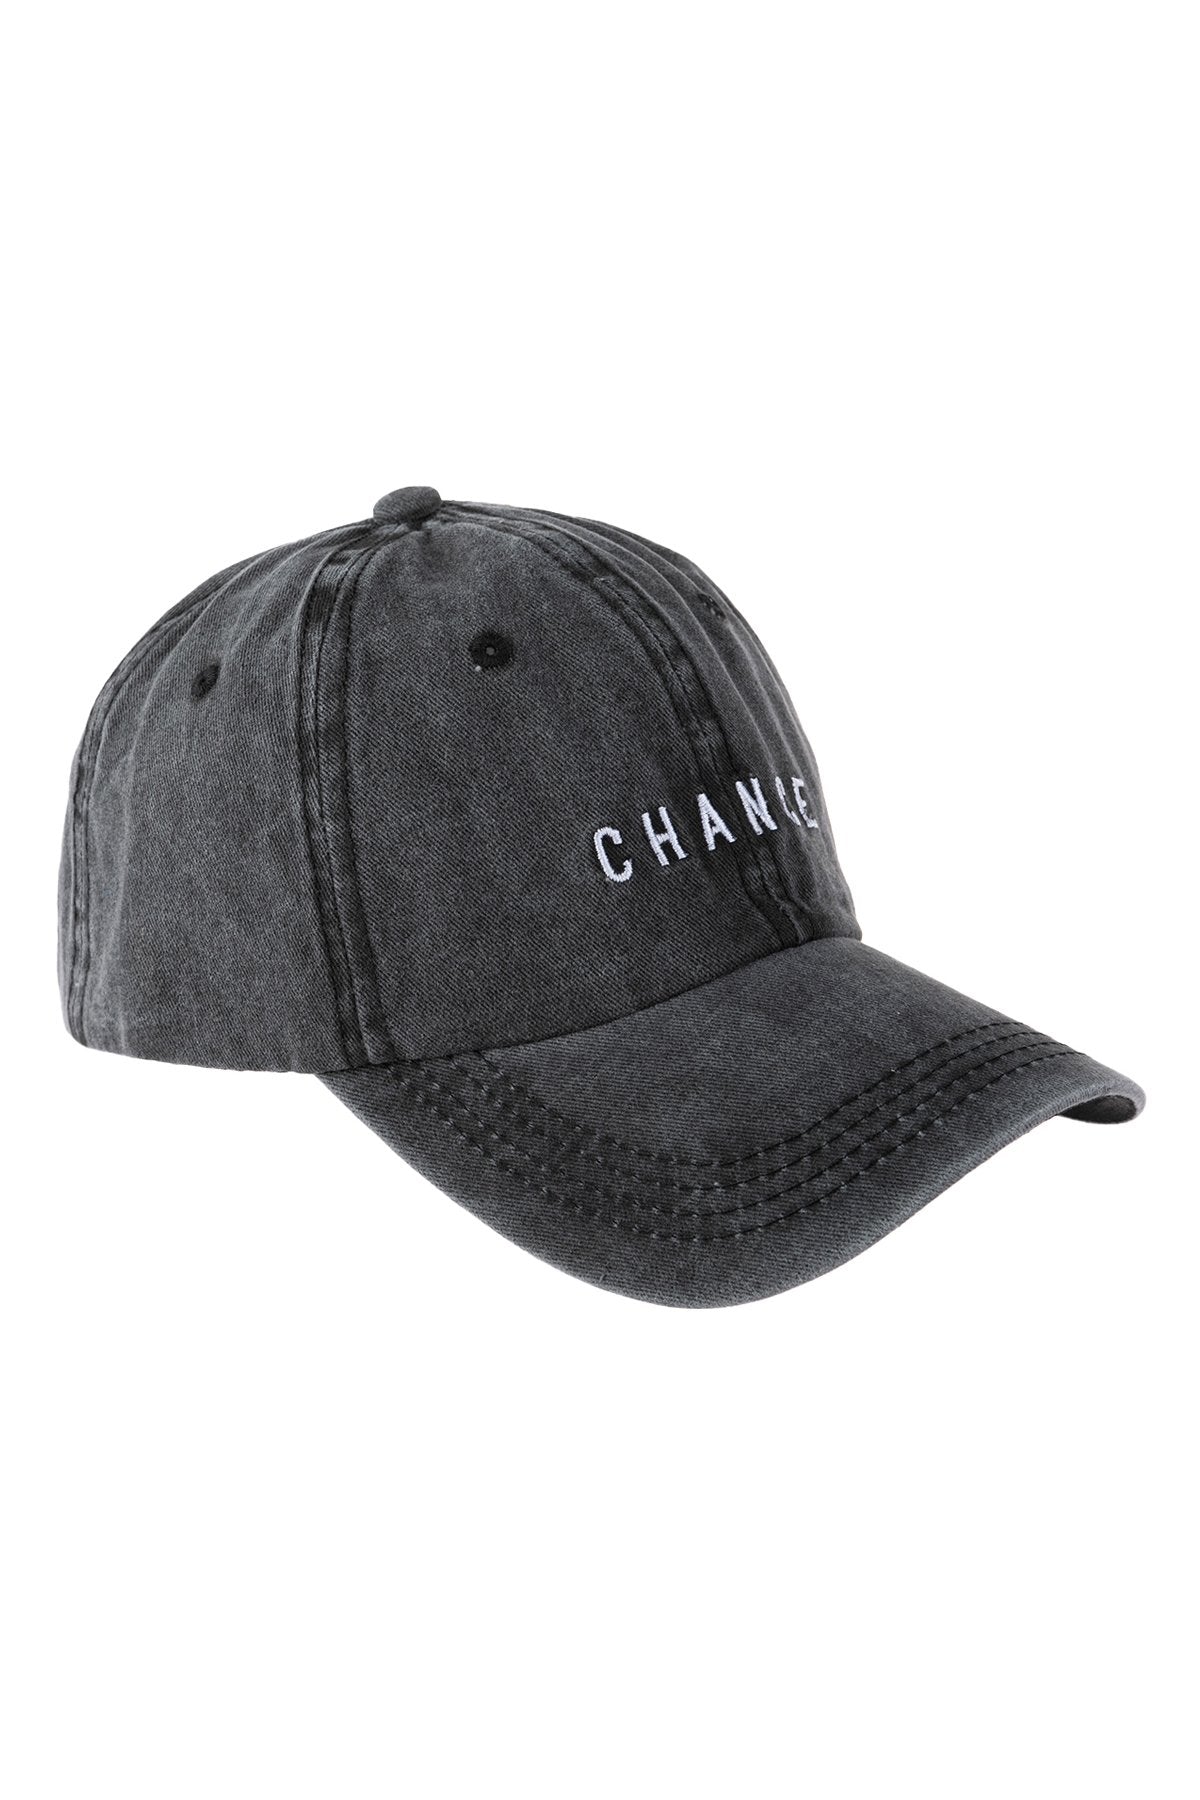 Hdt3228 - "Chance" Embroidered Acid Washed Cap